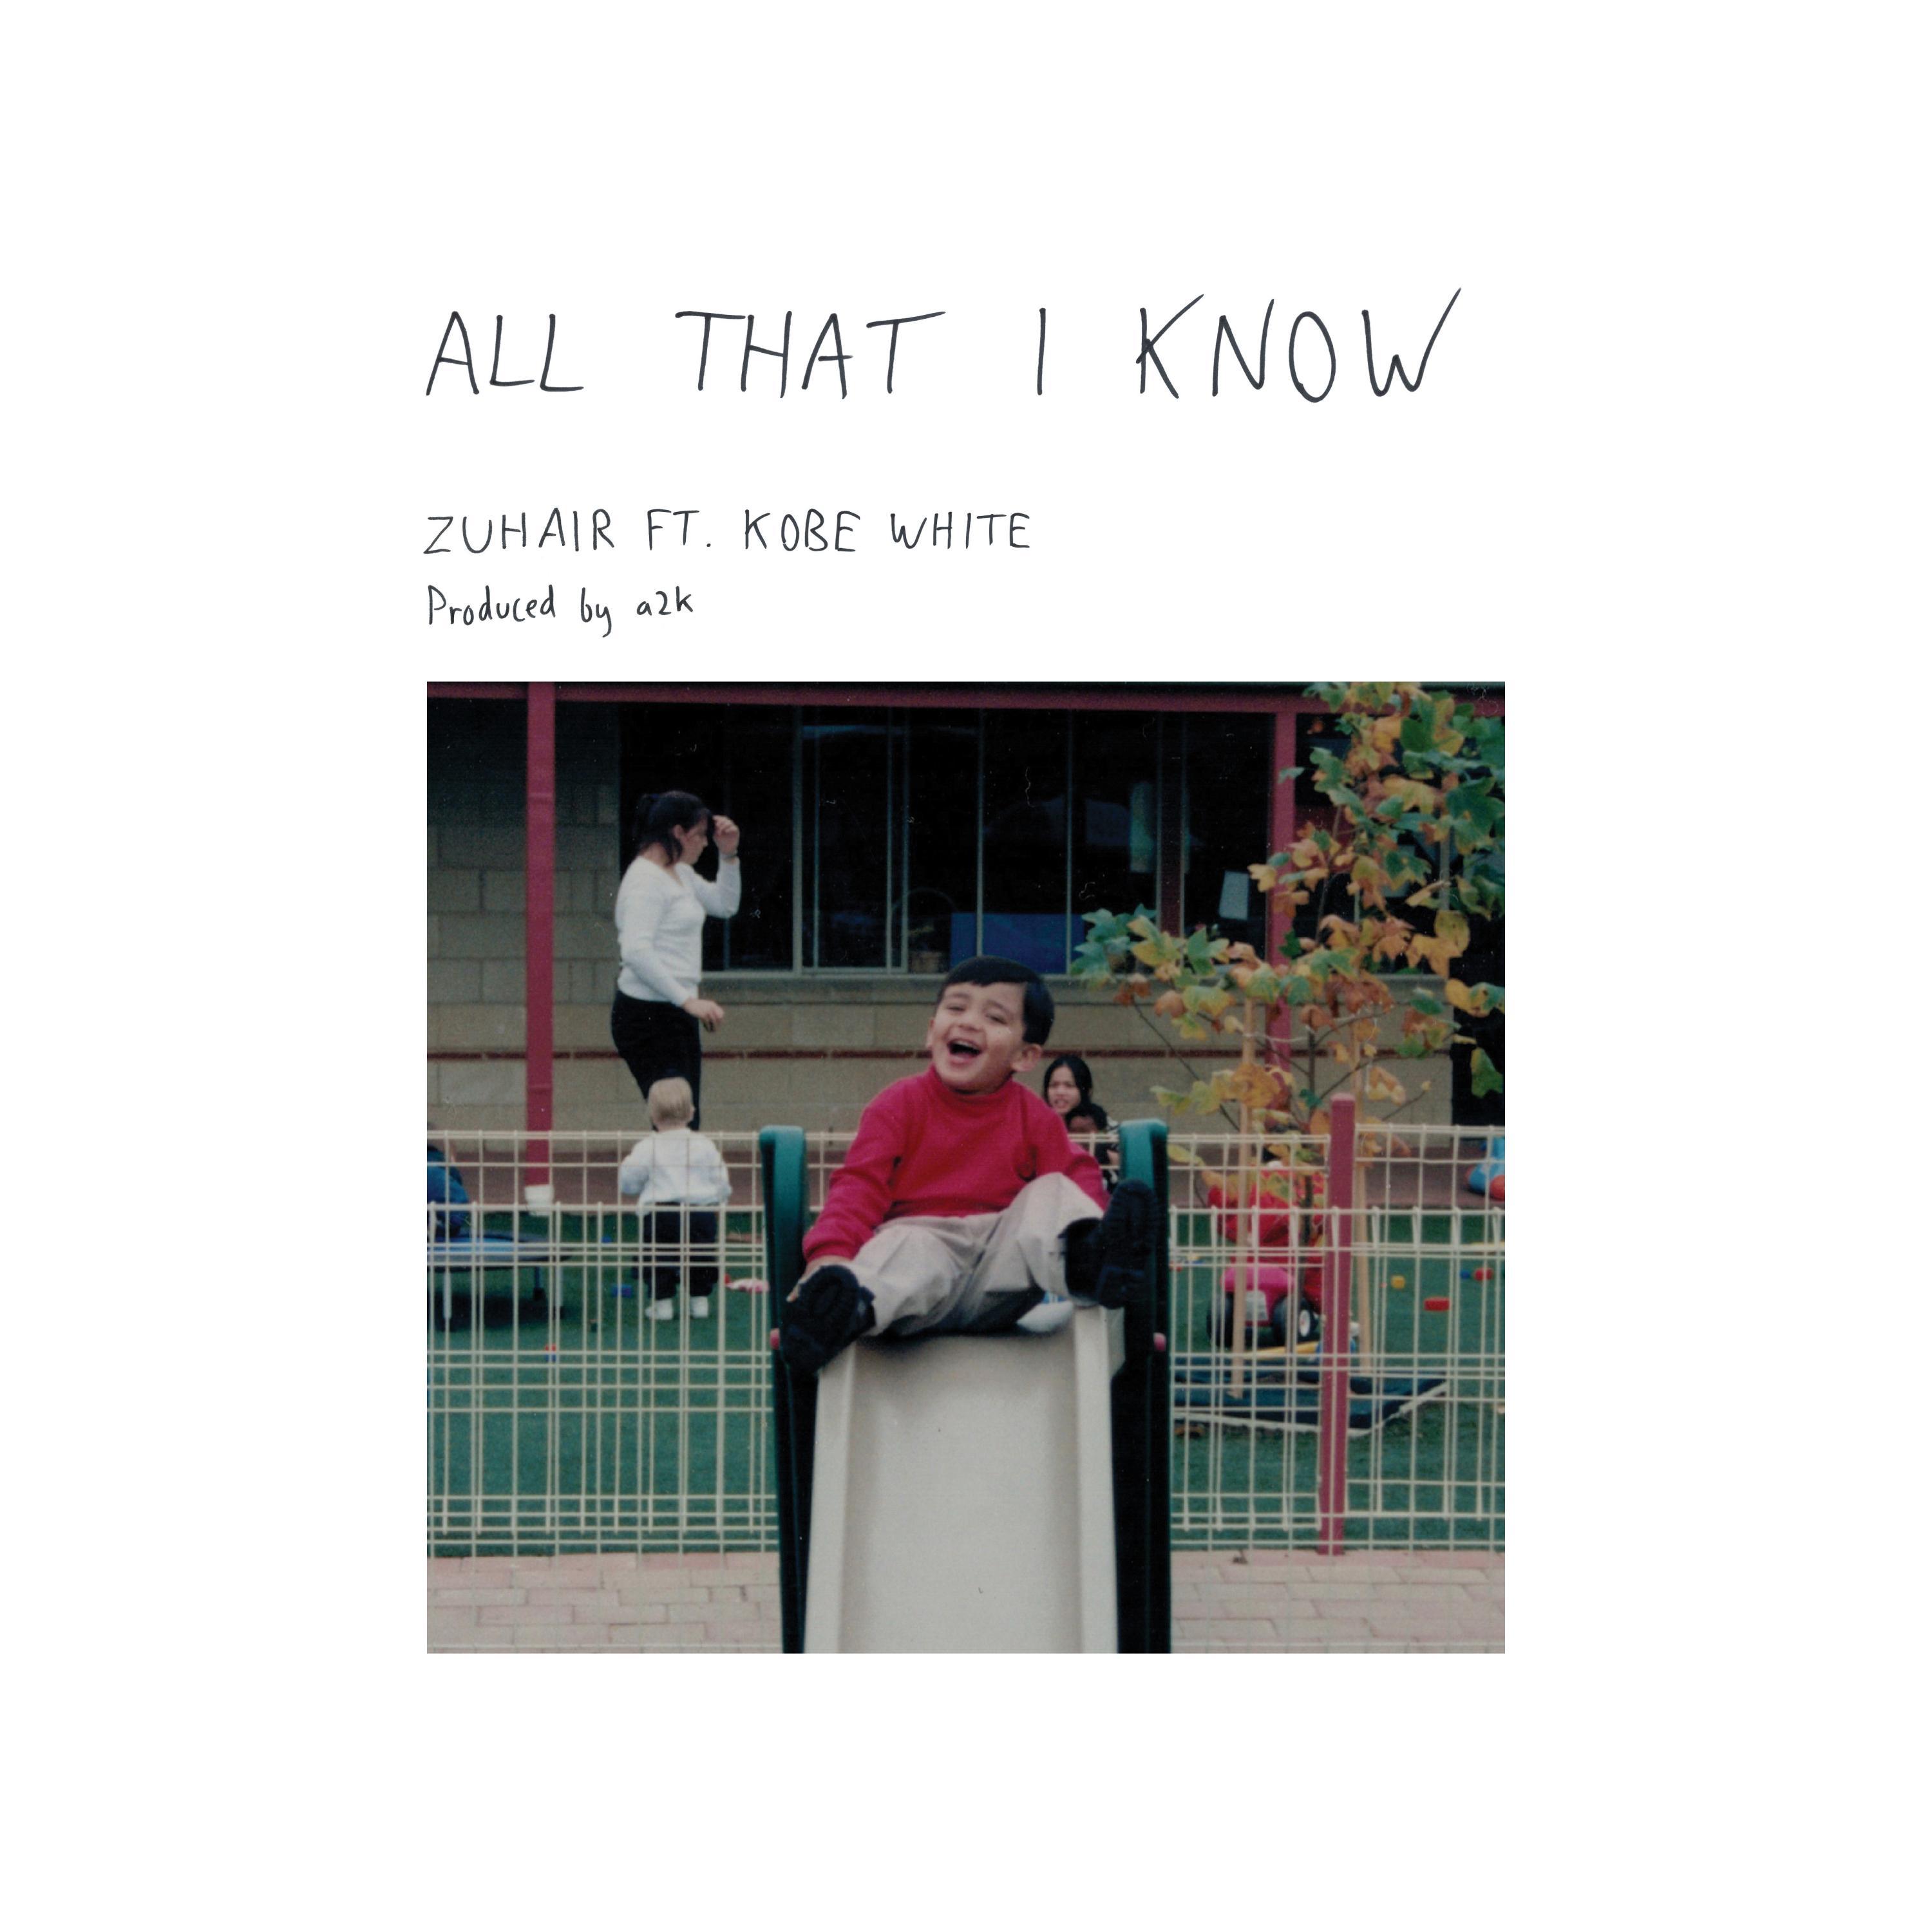 ZUHAIR - All That I Know